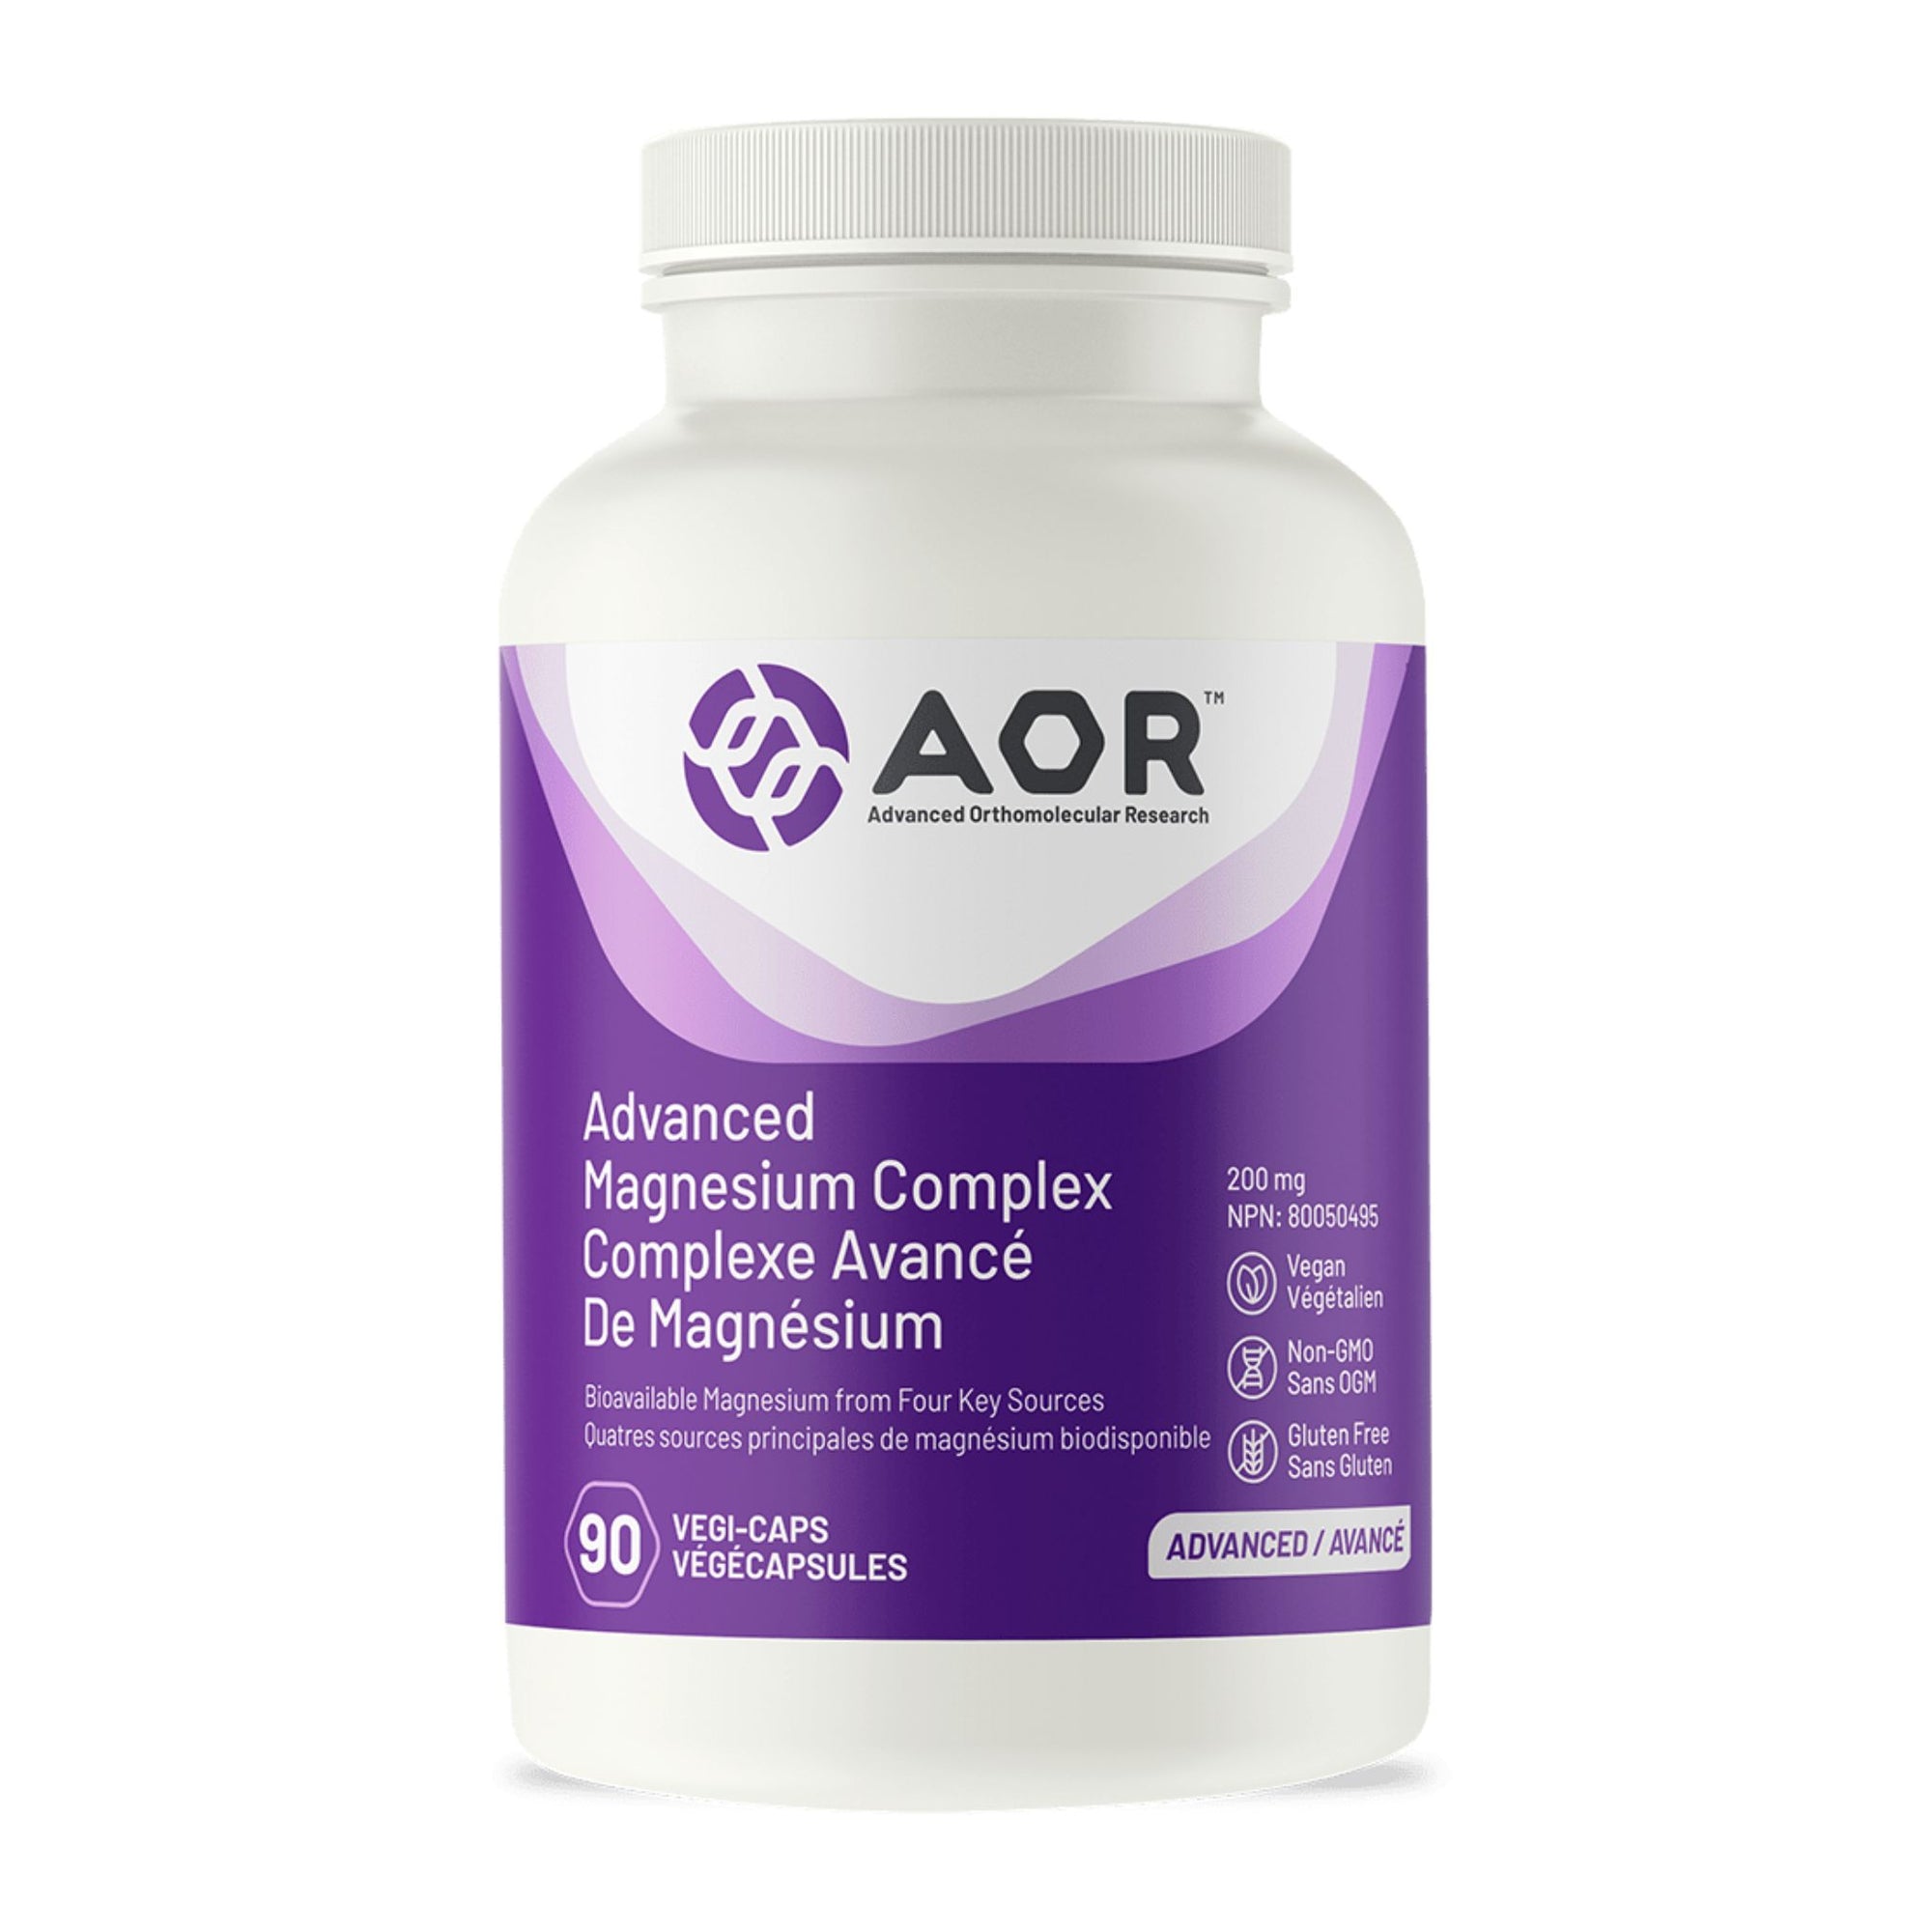 AOR Advanced Magnesium Complex product image of 90 capsule bottle - 200mg - bioavailable magnesium from four key sources.